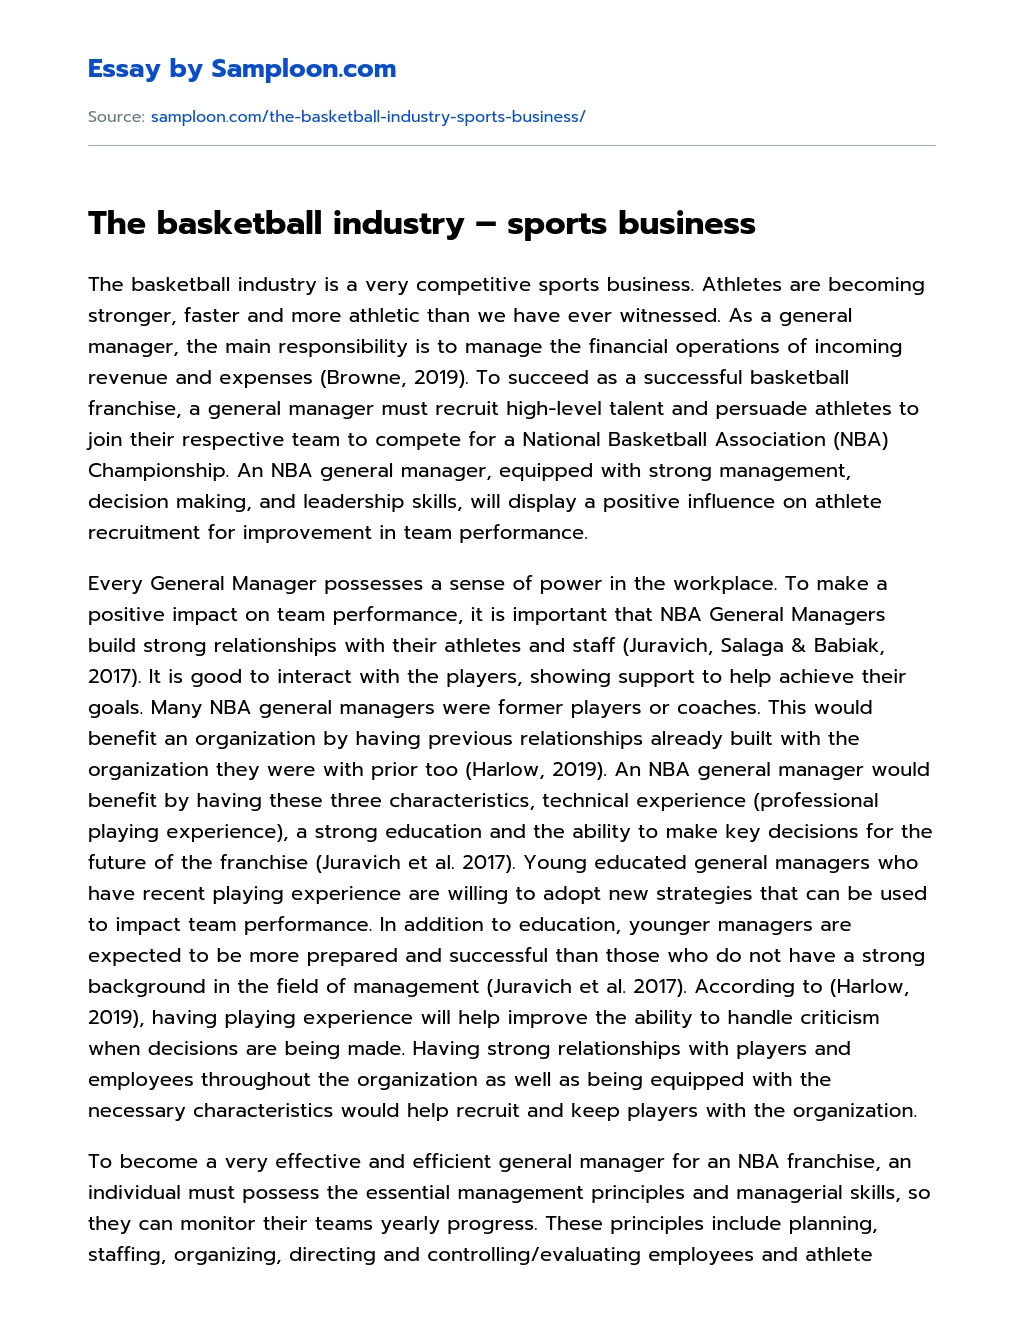 The basketball industry – sports business essay